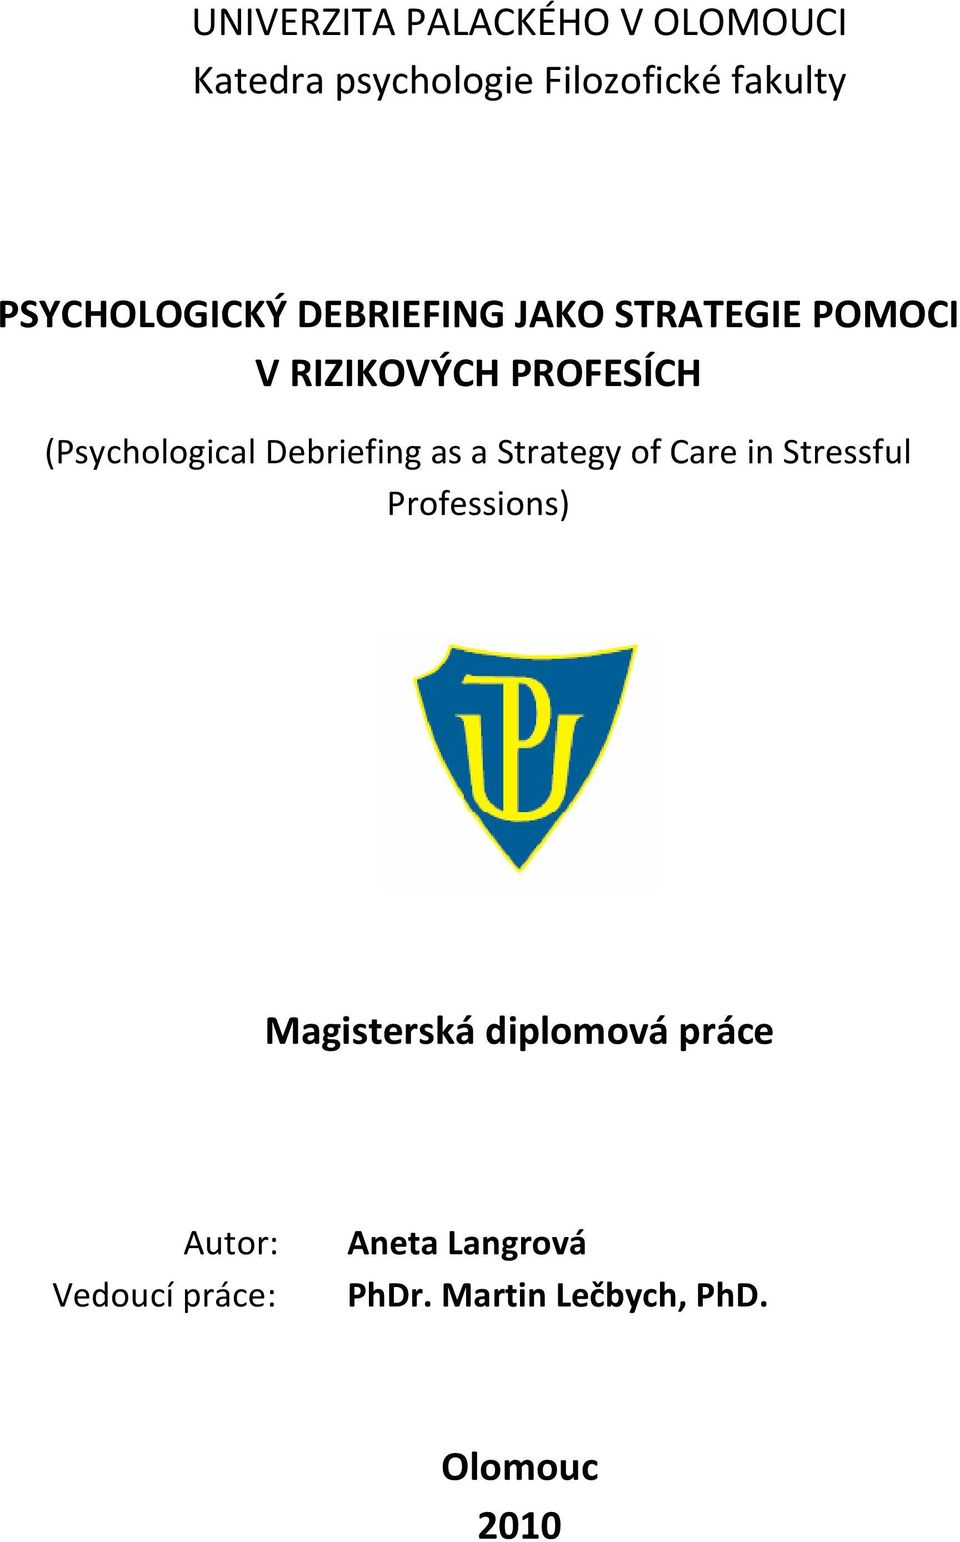 (Psychological Debriefing as a Strategy of Care in Stressful Professions)